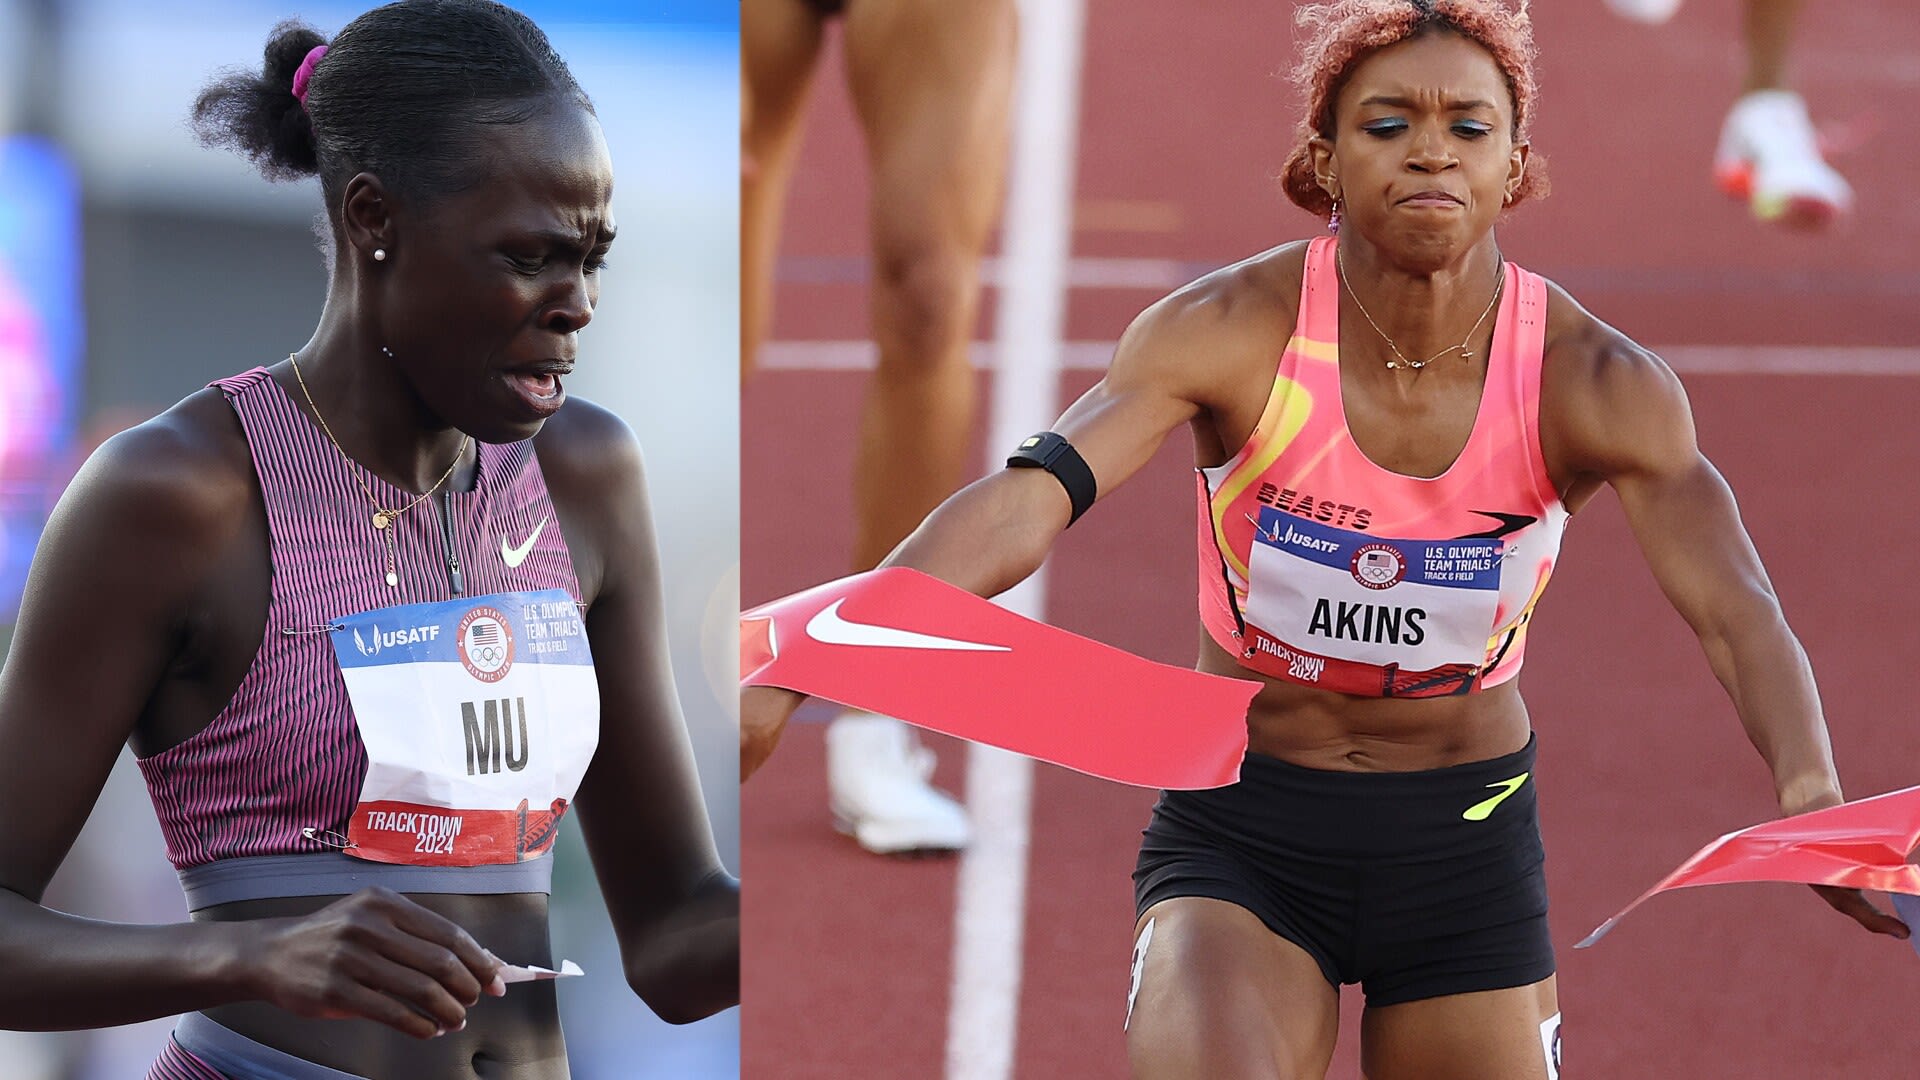 Another 800m fall leads to heartbreak at Olympic Track and Field Trials